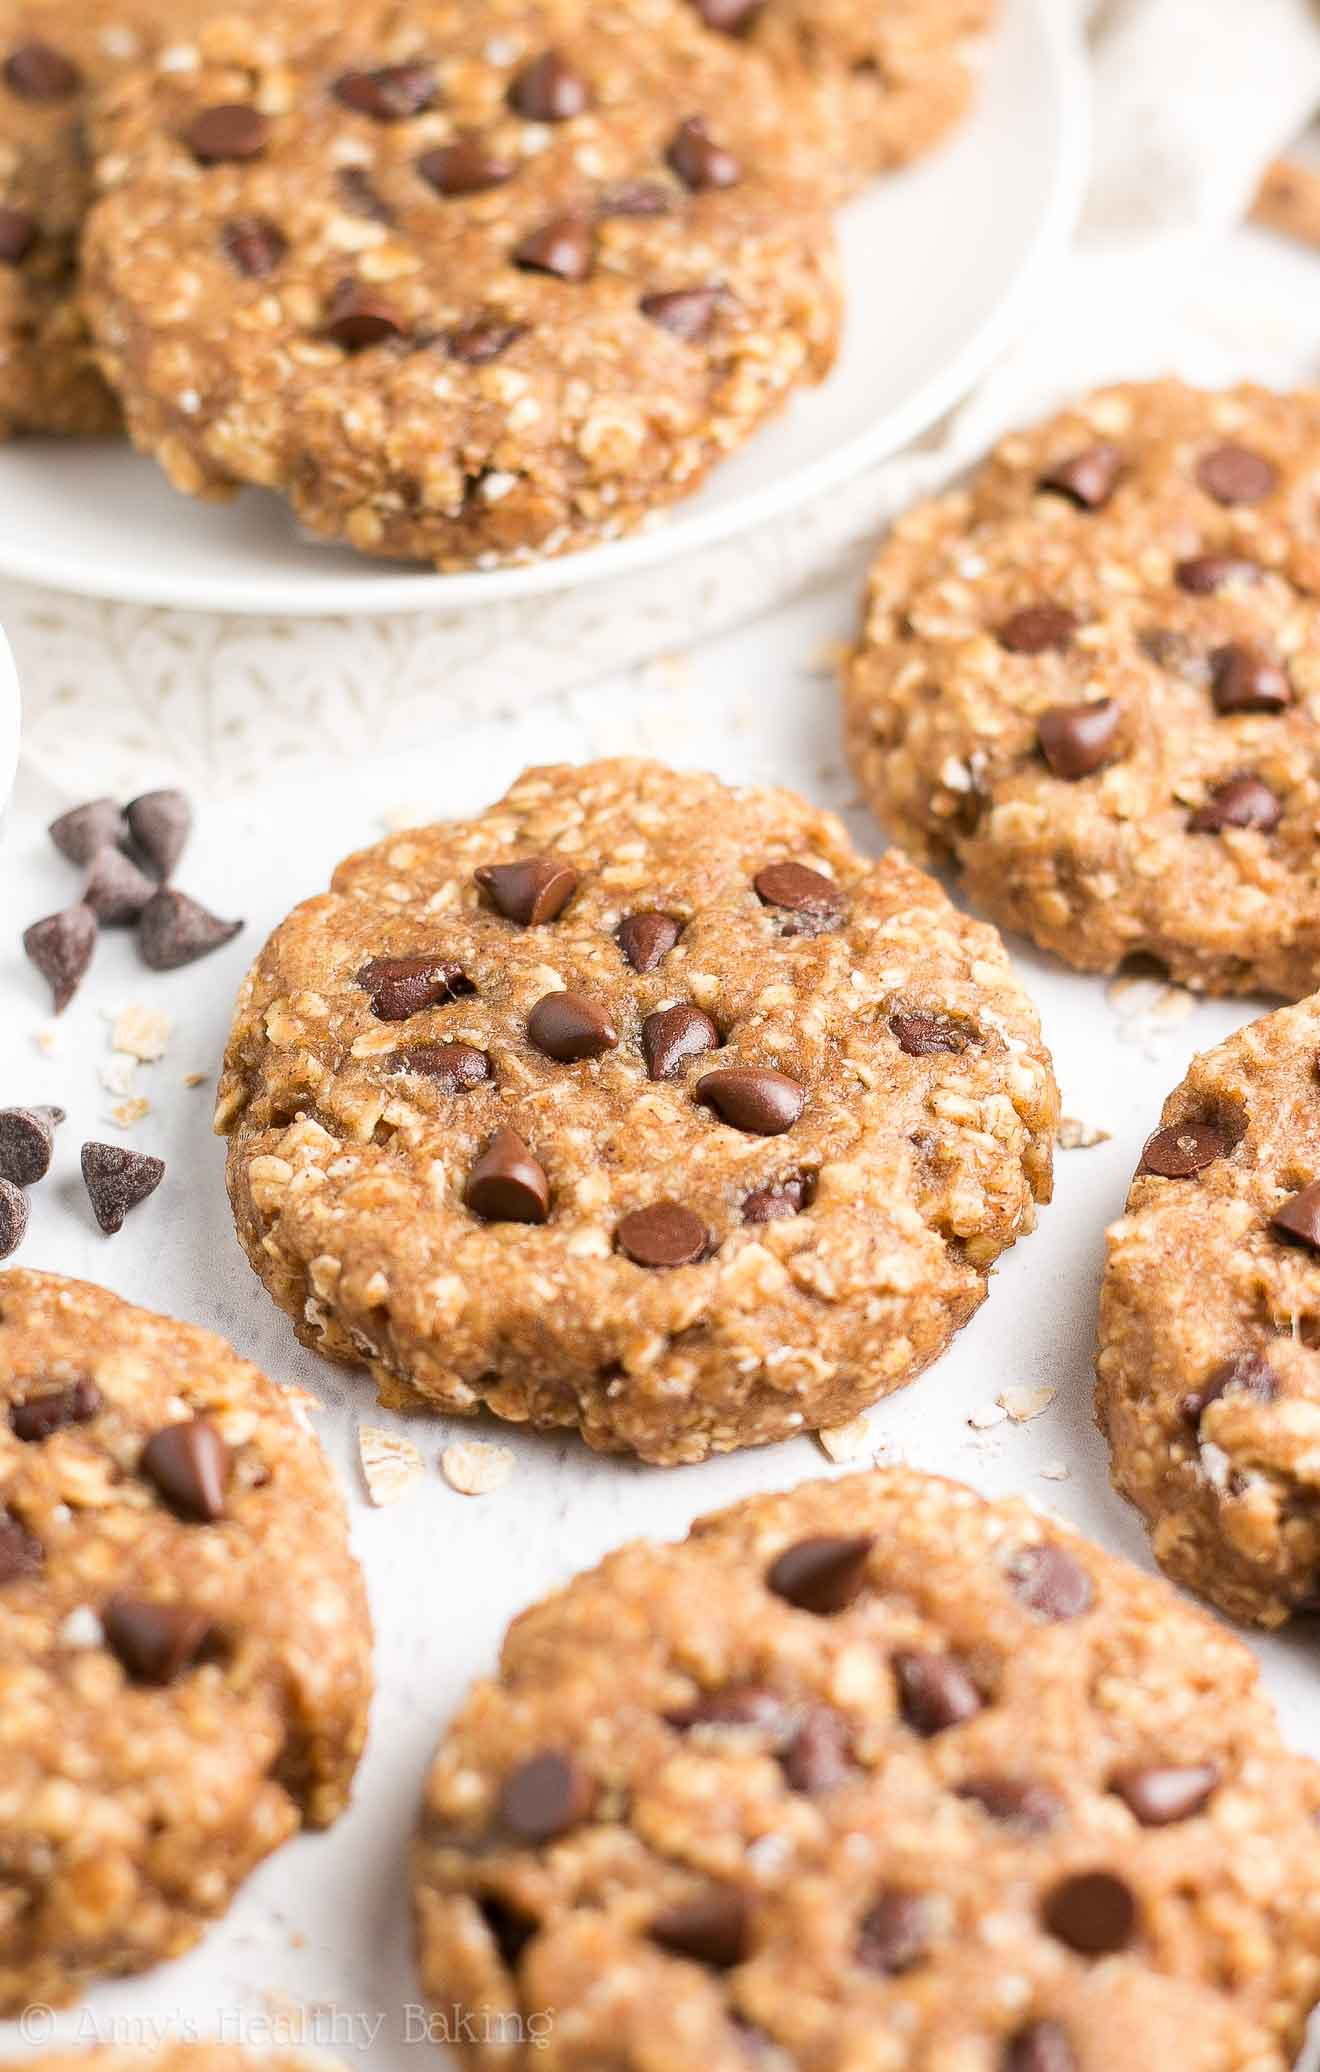 Healthy Peanut Butter Oatmeal Cookies
 Healthy Chocolate Chip Peanut Butter Oatmeal Breakfast